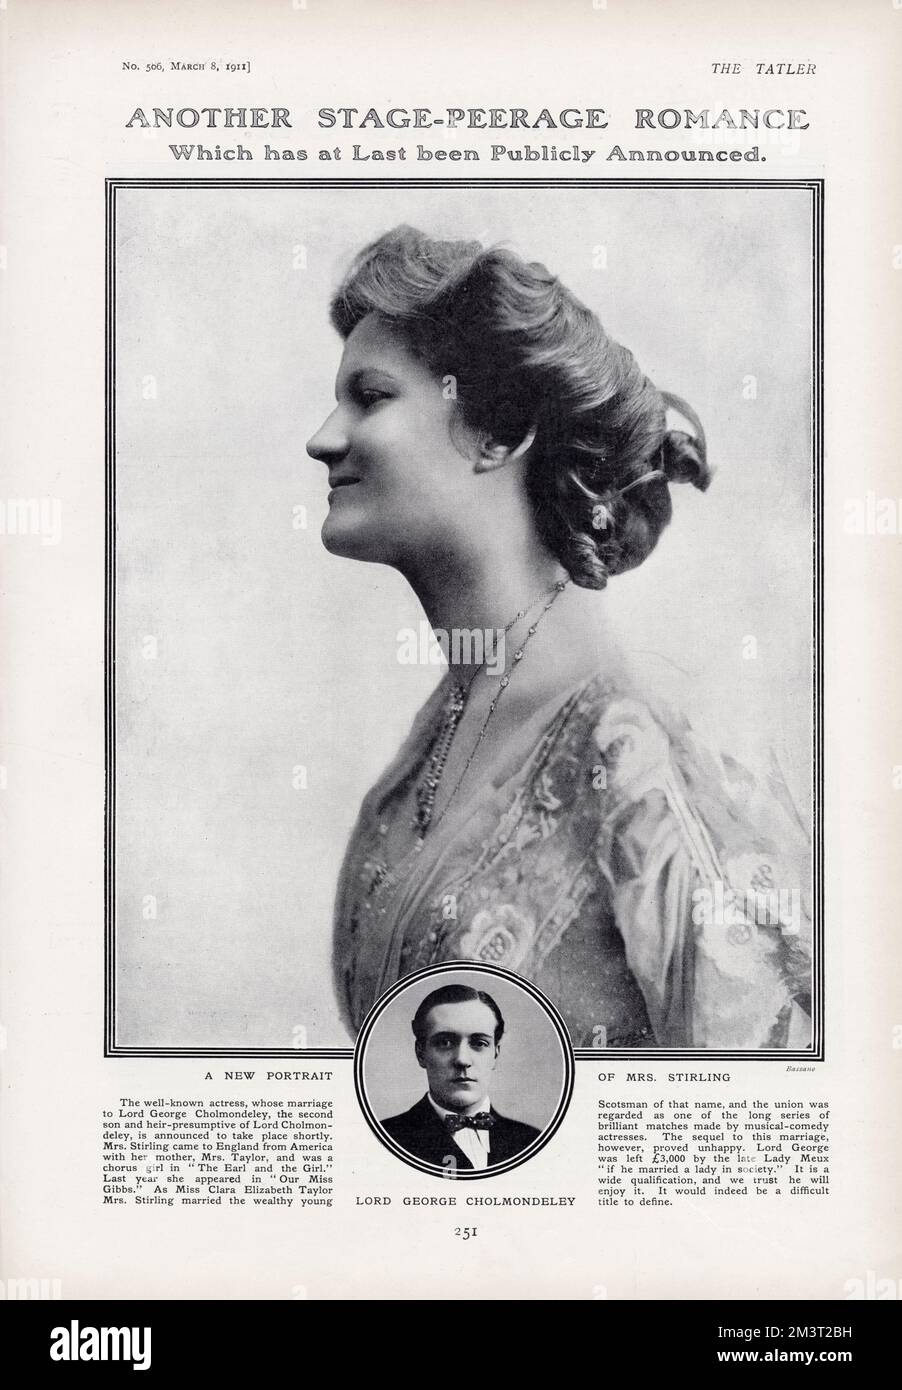 Page from The Tatler reporting on the marriage of Mrs Stirling (formerly Clare Elizabeth Taylor) of the Gaiety Theatre and Lord George Cholmondeley, second son of the Marquess of Cholmondeley. An American divorcee, Clara was a well-known actress at George Edwardes' famous Gaiety Theatre. George had been left a legacy of £3000 by Lady Meux (herself a former actress) with the rather hypocritical stipulation that he should marry a 'lady of society'. The Cholmondeleys' marriage eventually ended in divorce. Stock Photo